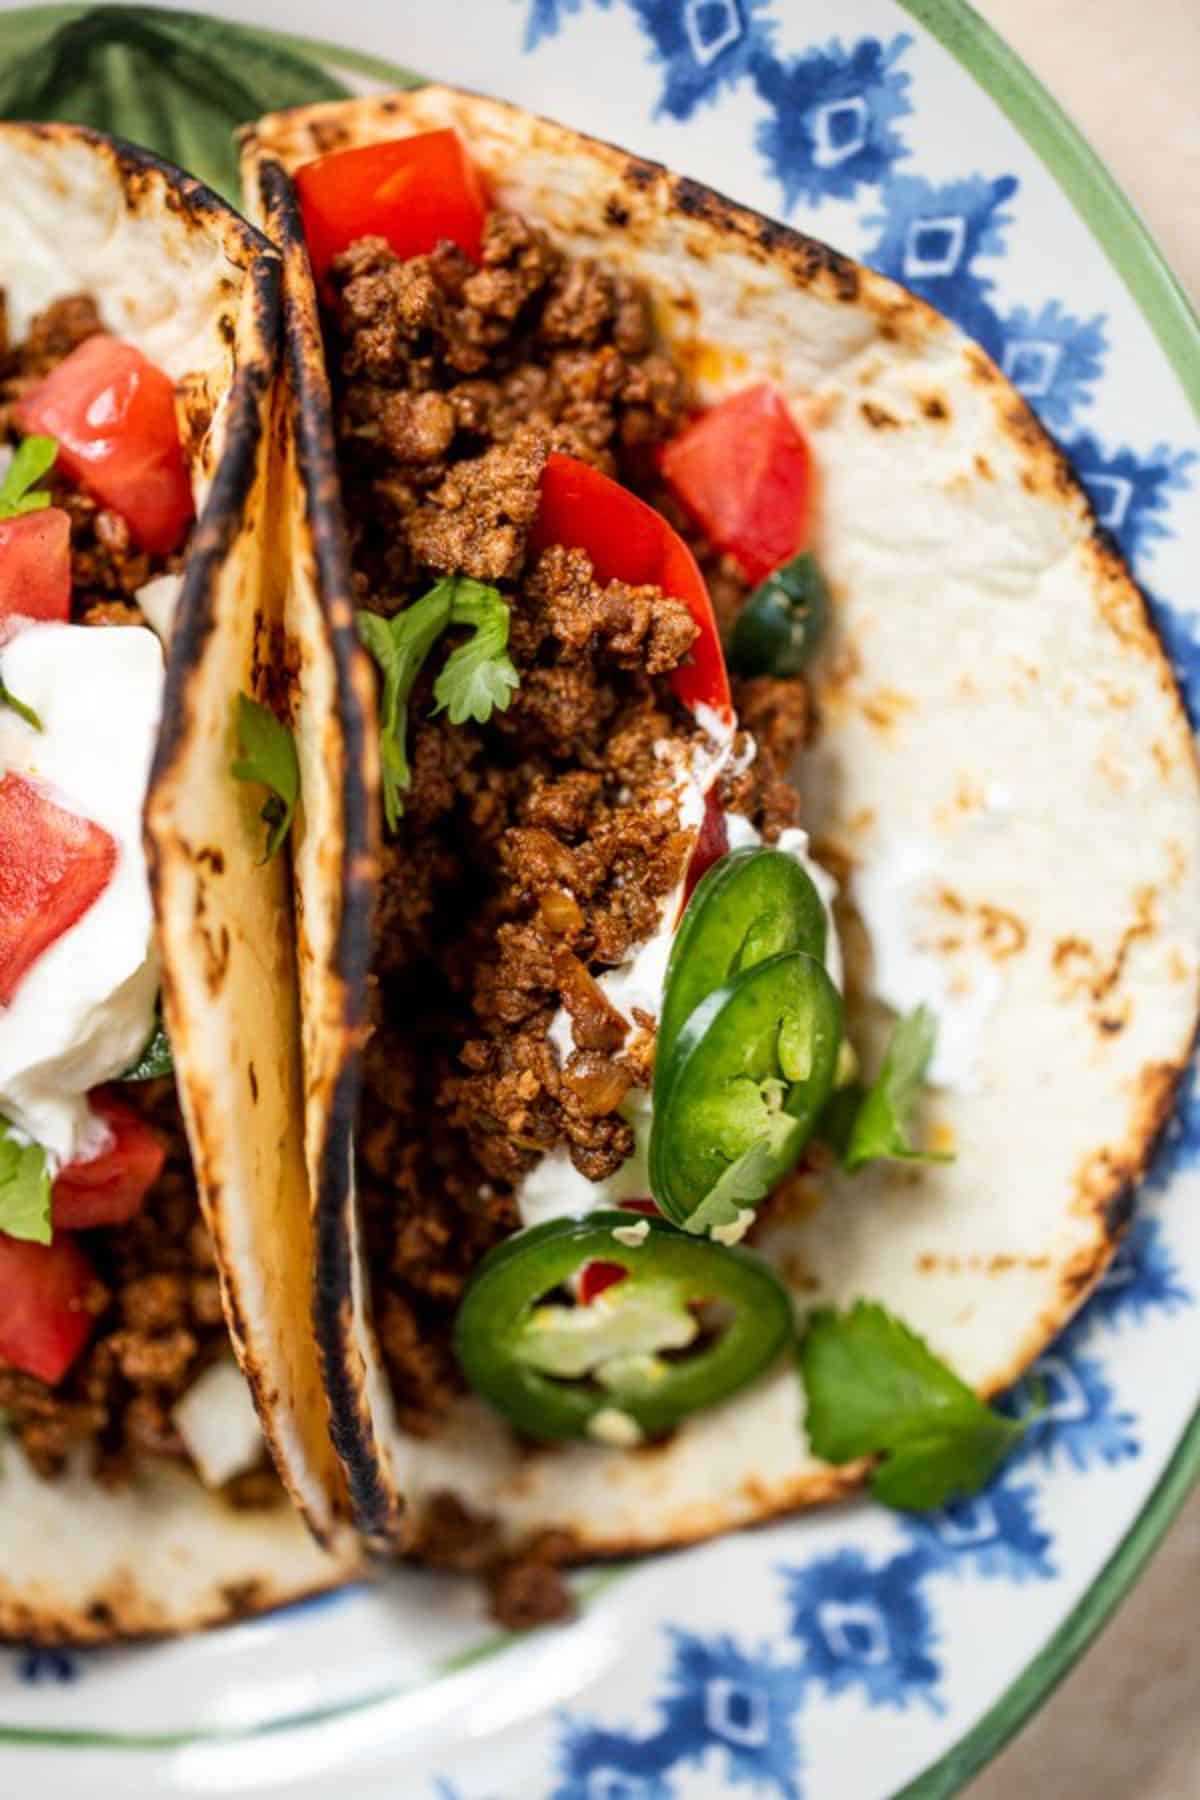 Mouth-watering ground venison tacos on a tray.